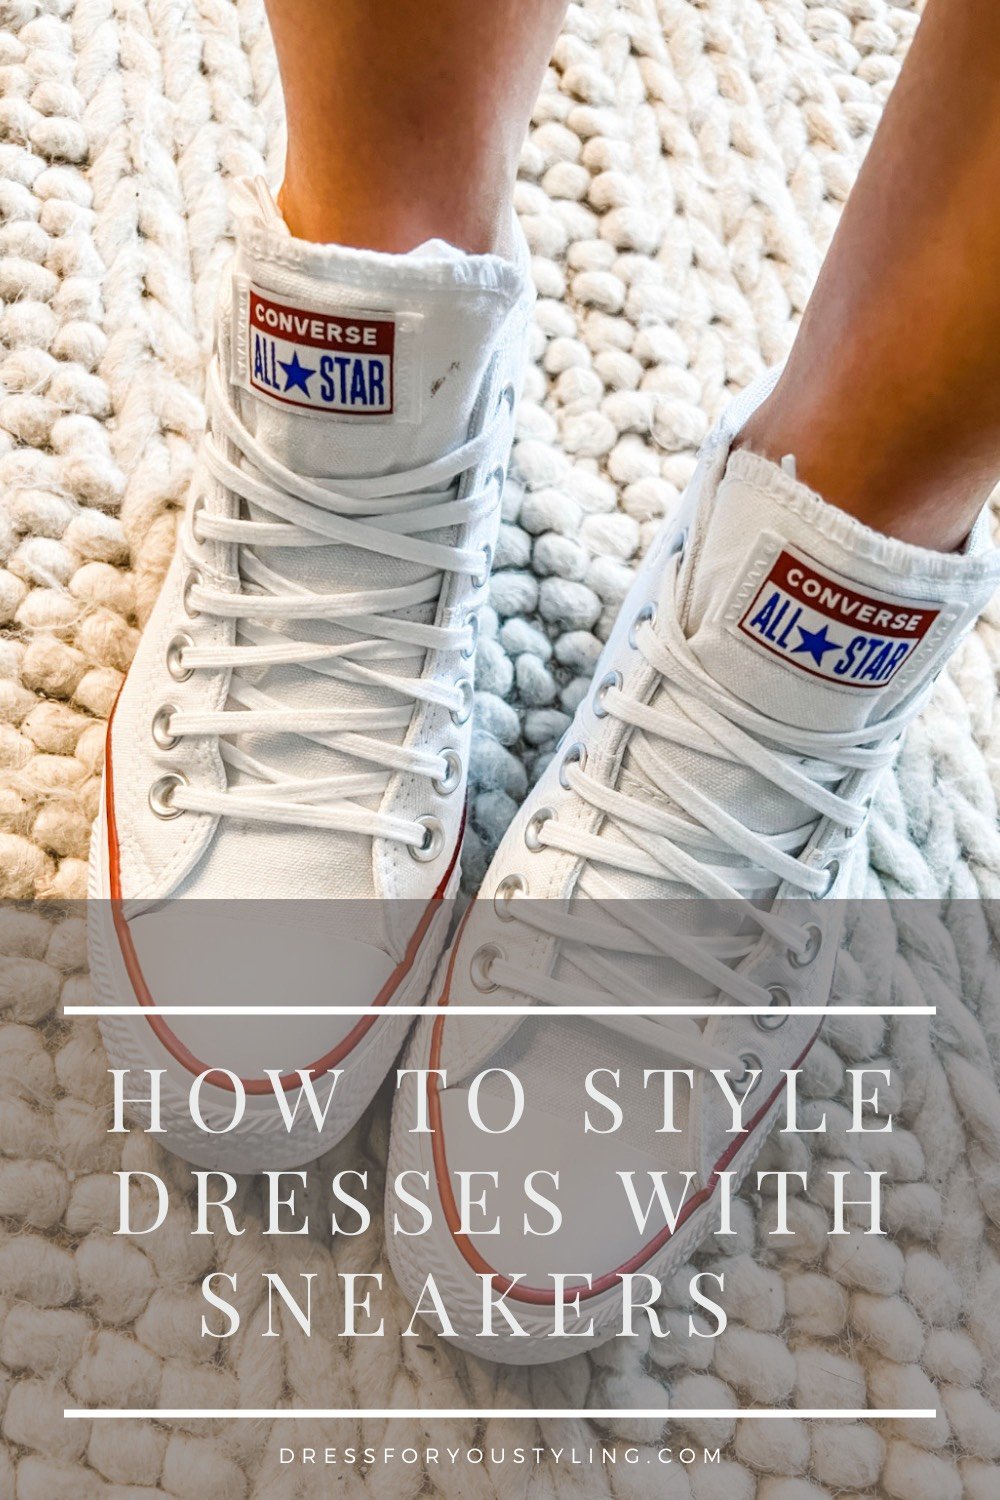 dresses with sneakers cover page.jpg